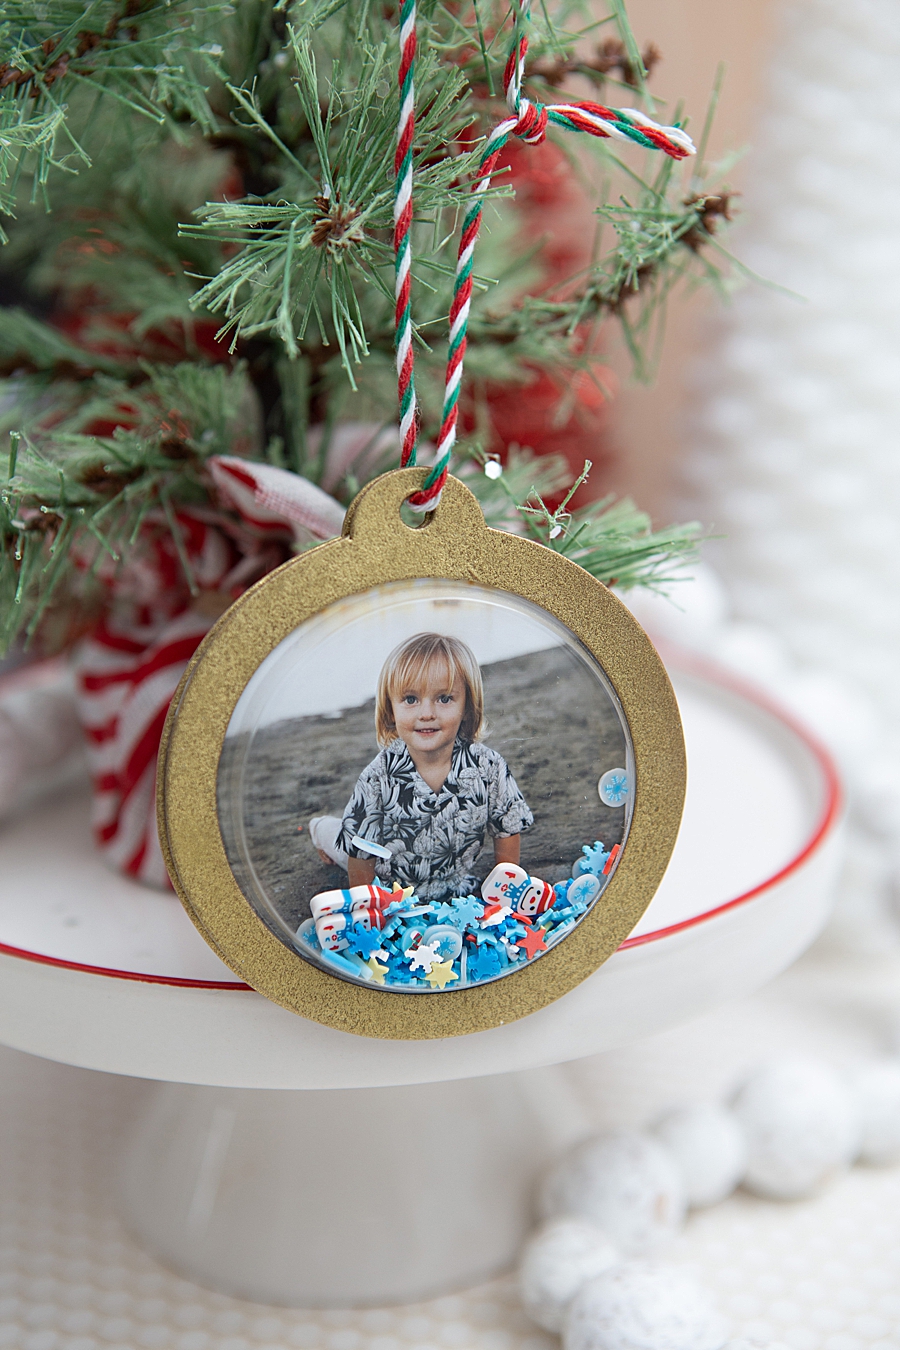 I used my Canon SELPHY to make these darling photo shaker ornaments!